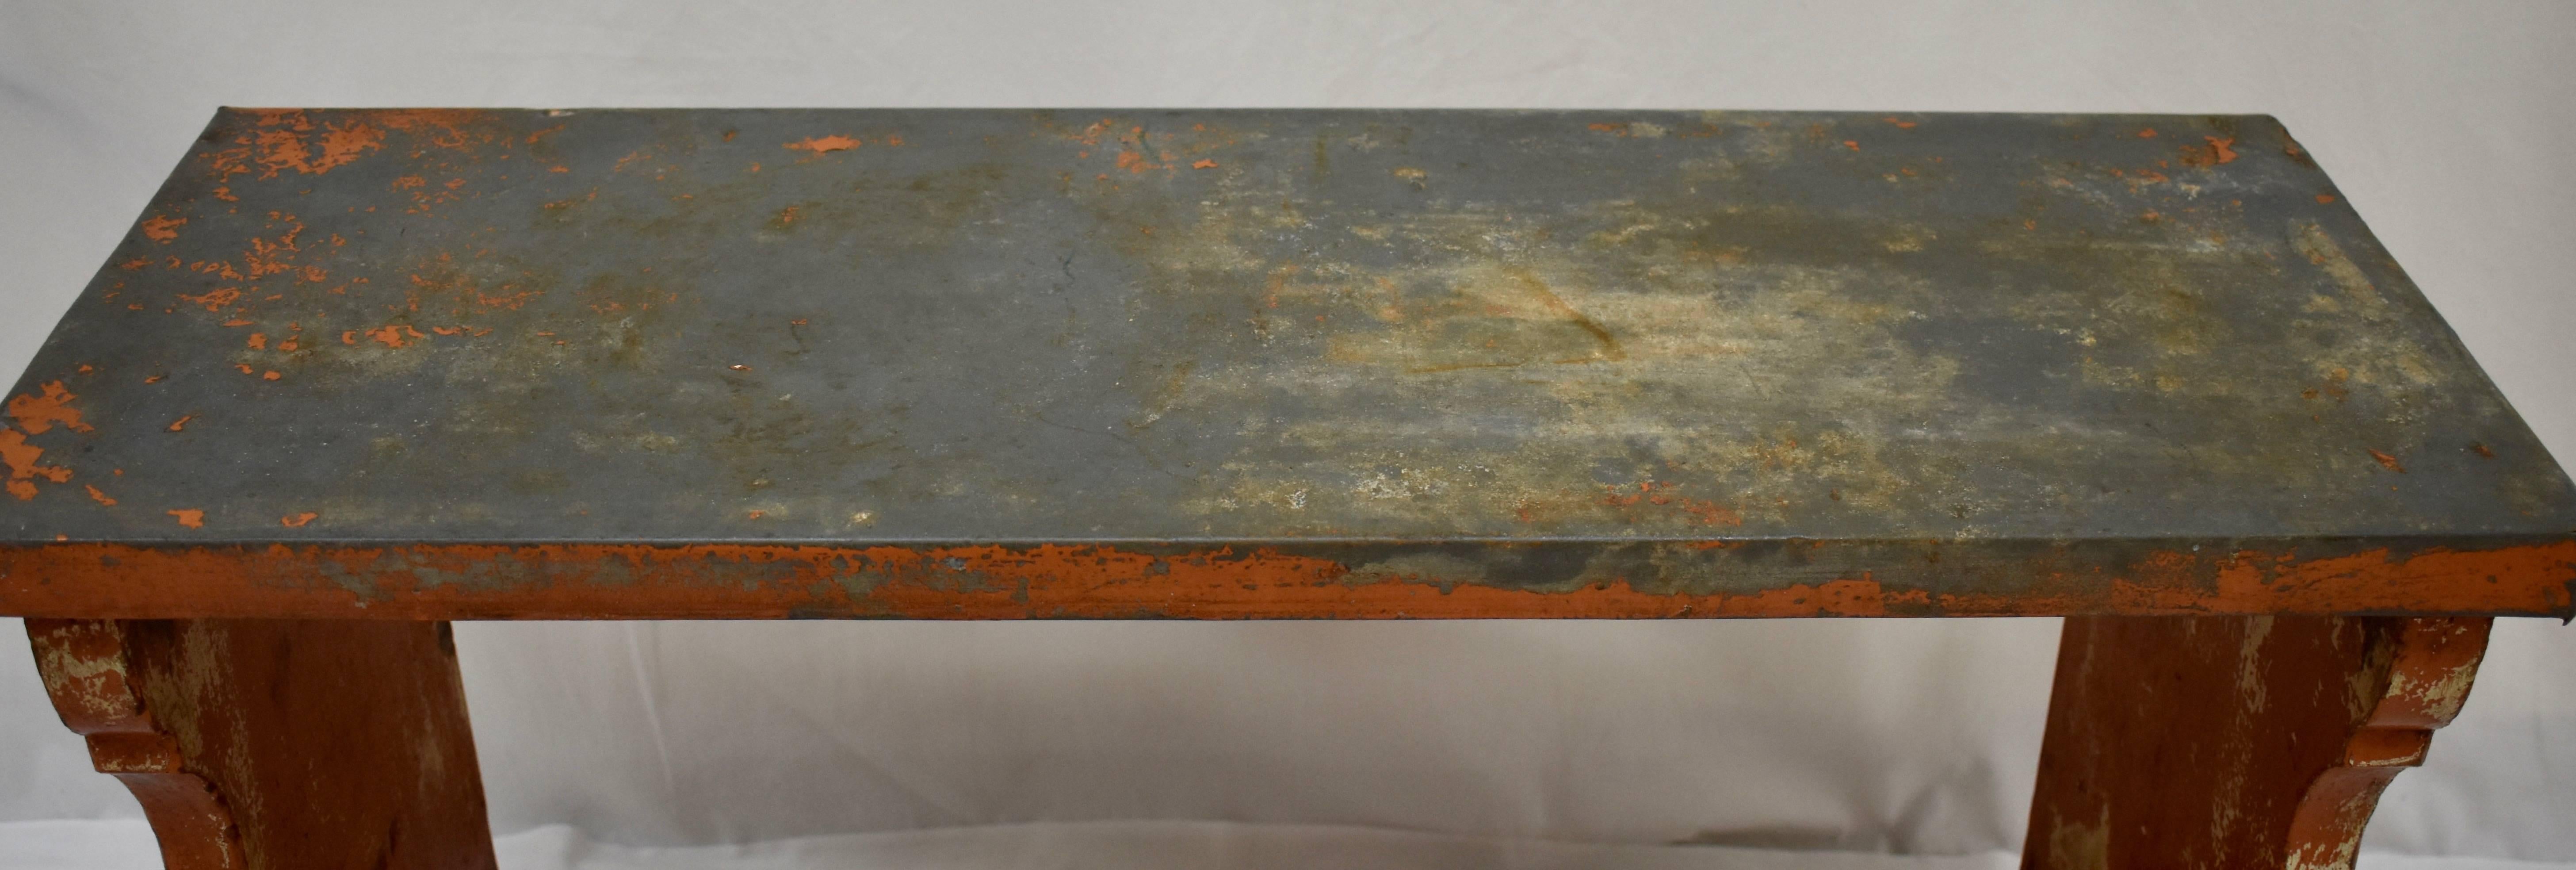 Pine Painted Zinc-Topped Water Bench 4